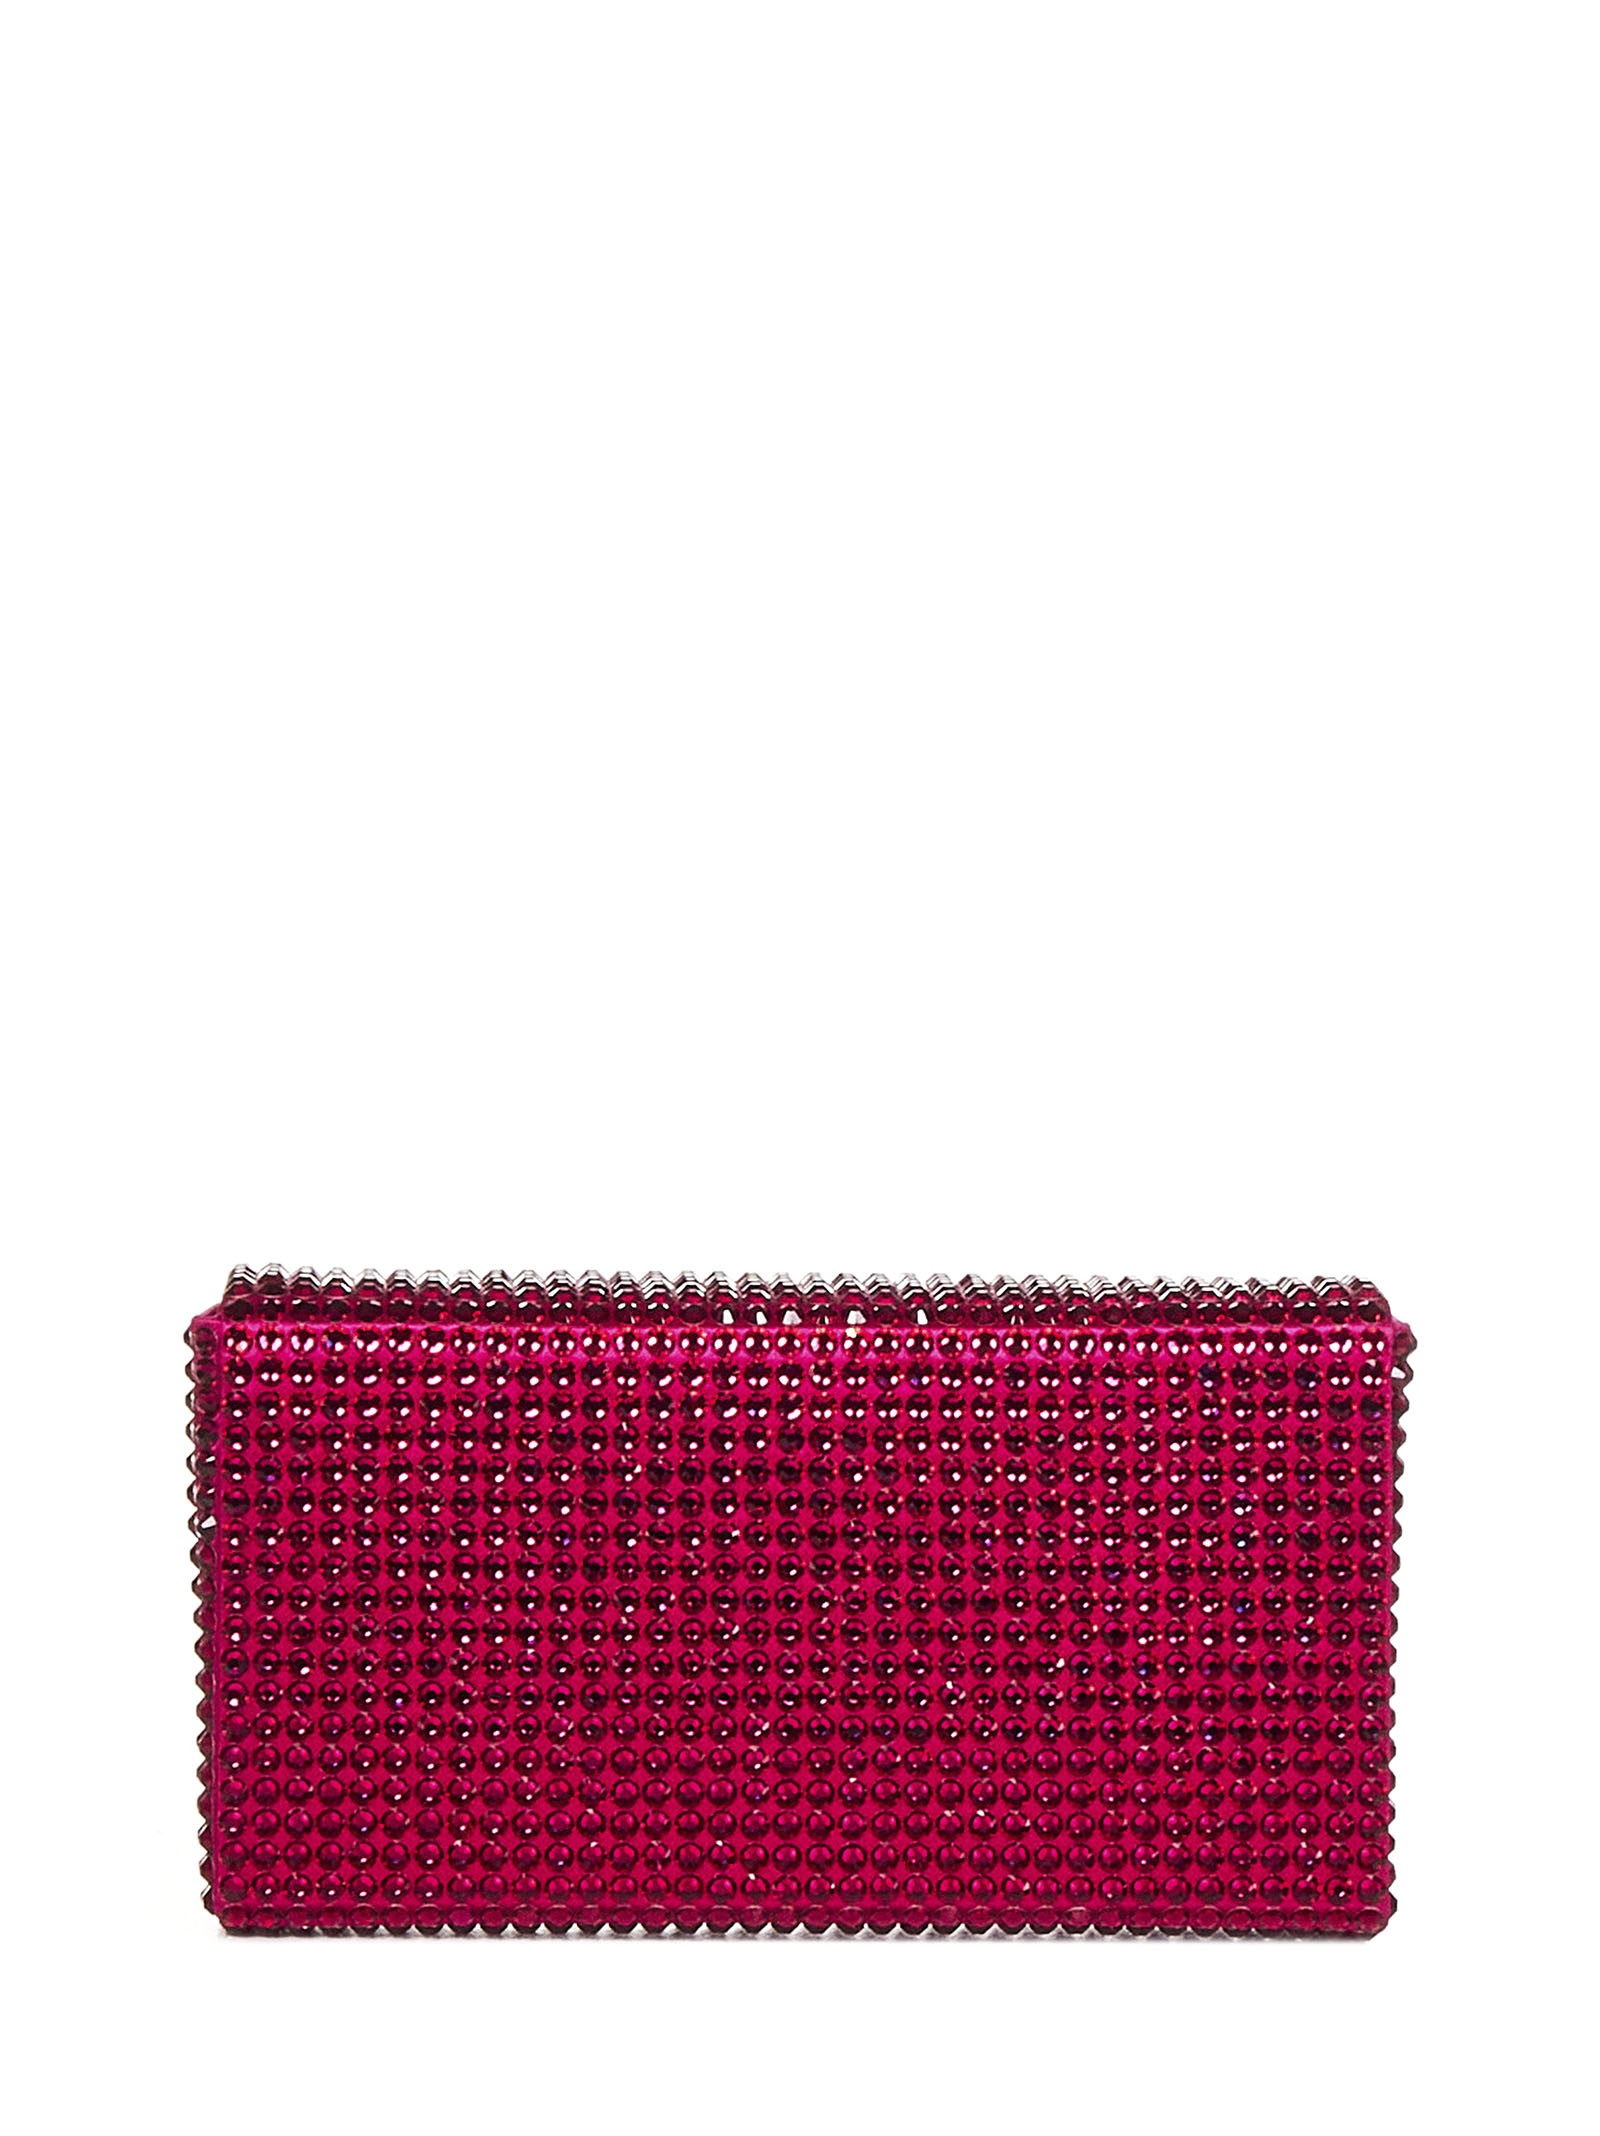 SUPER AMINI PALOMA ruby clutch in satin and crystals with chain shoulder strap. - 2